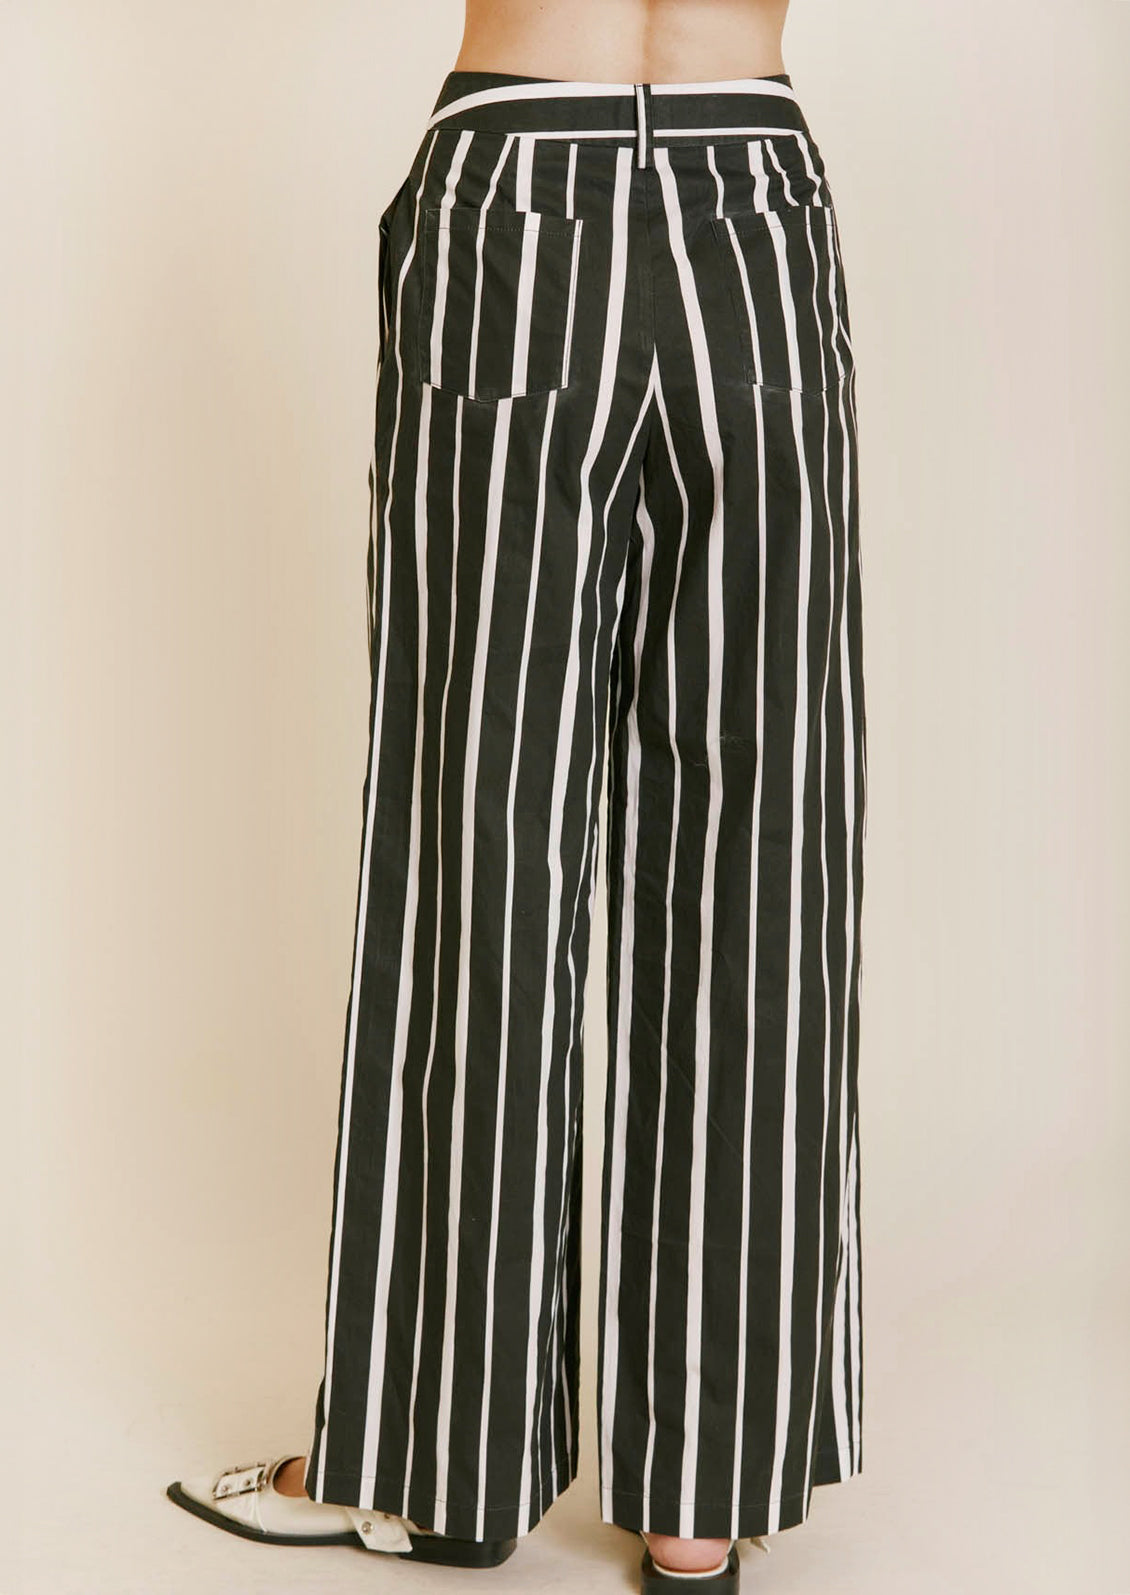 A pant of black and white striped pants.